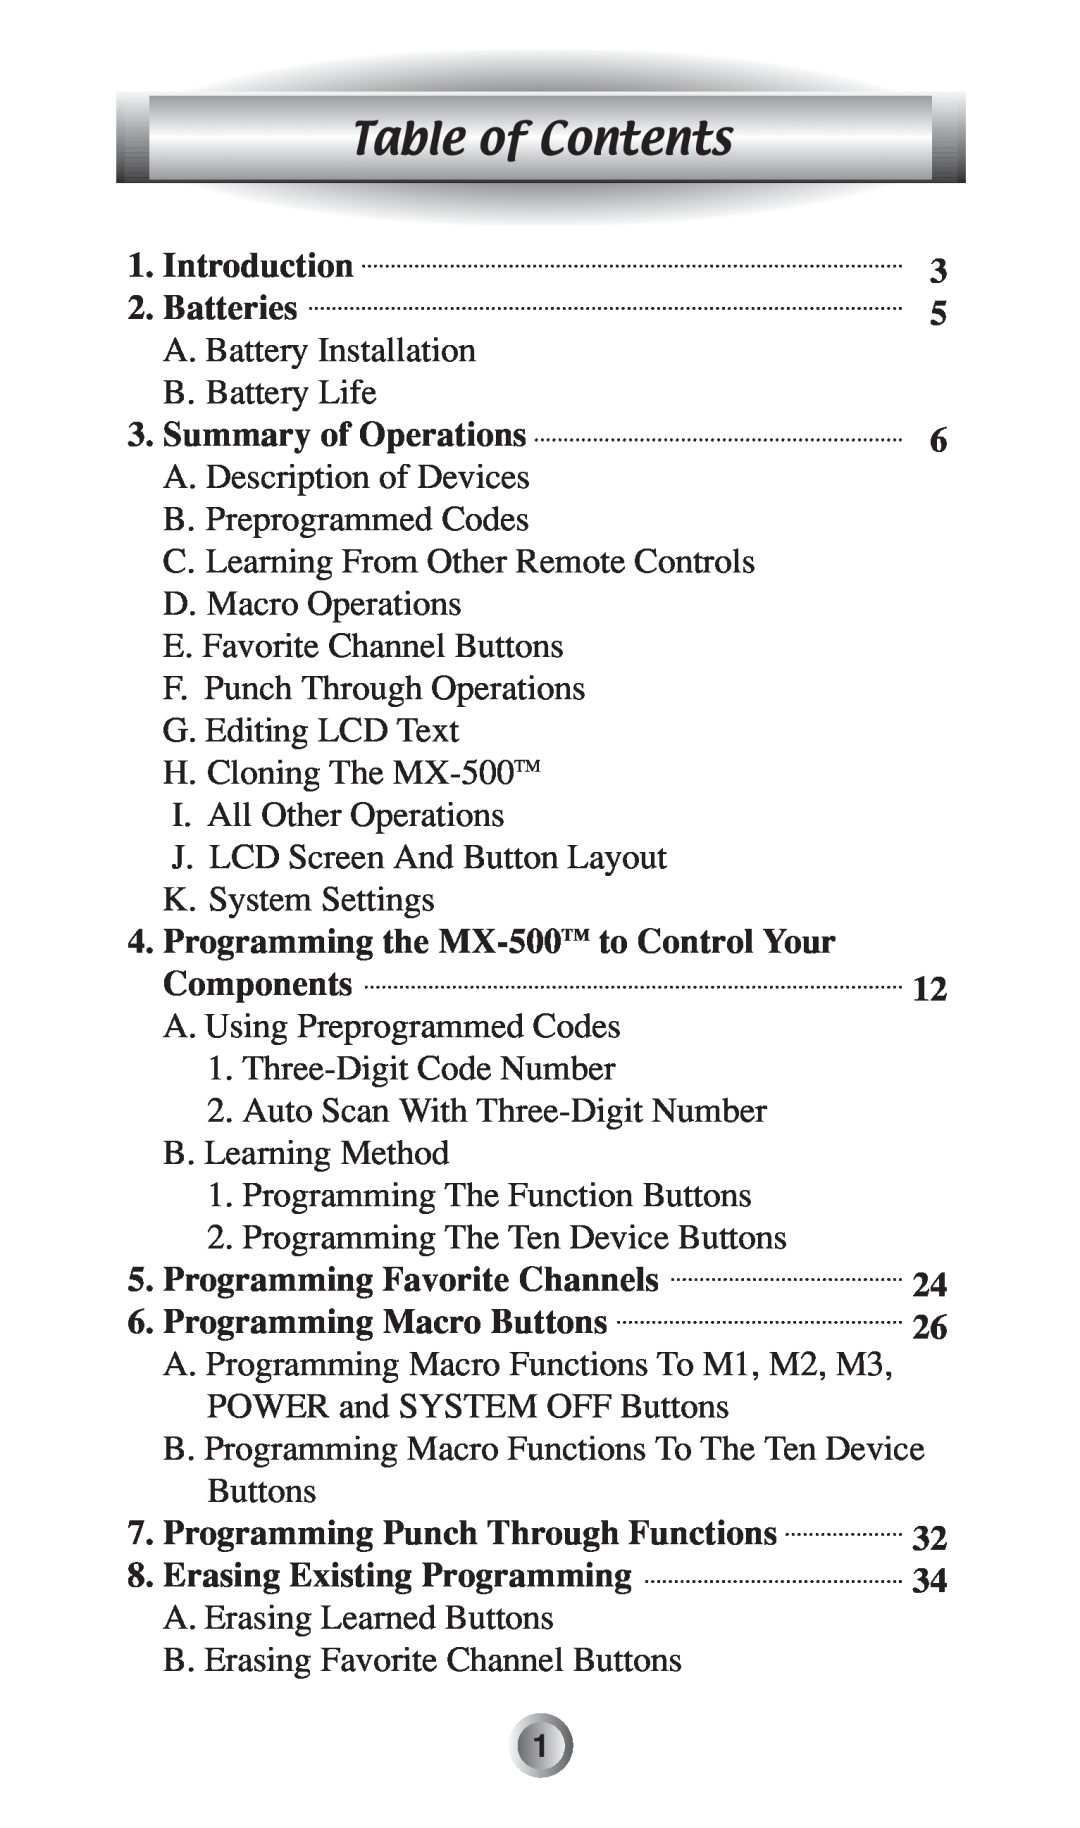 Radio Shack MX-500TM manual Table of Contents 